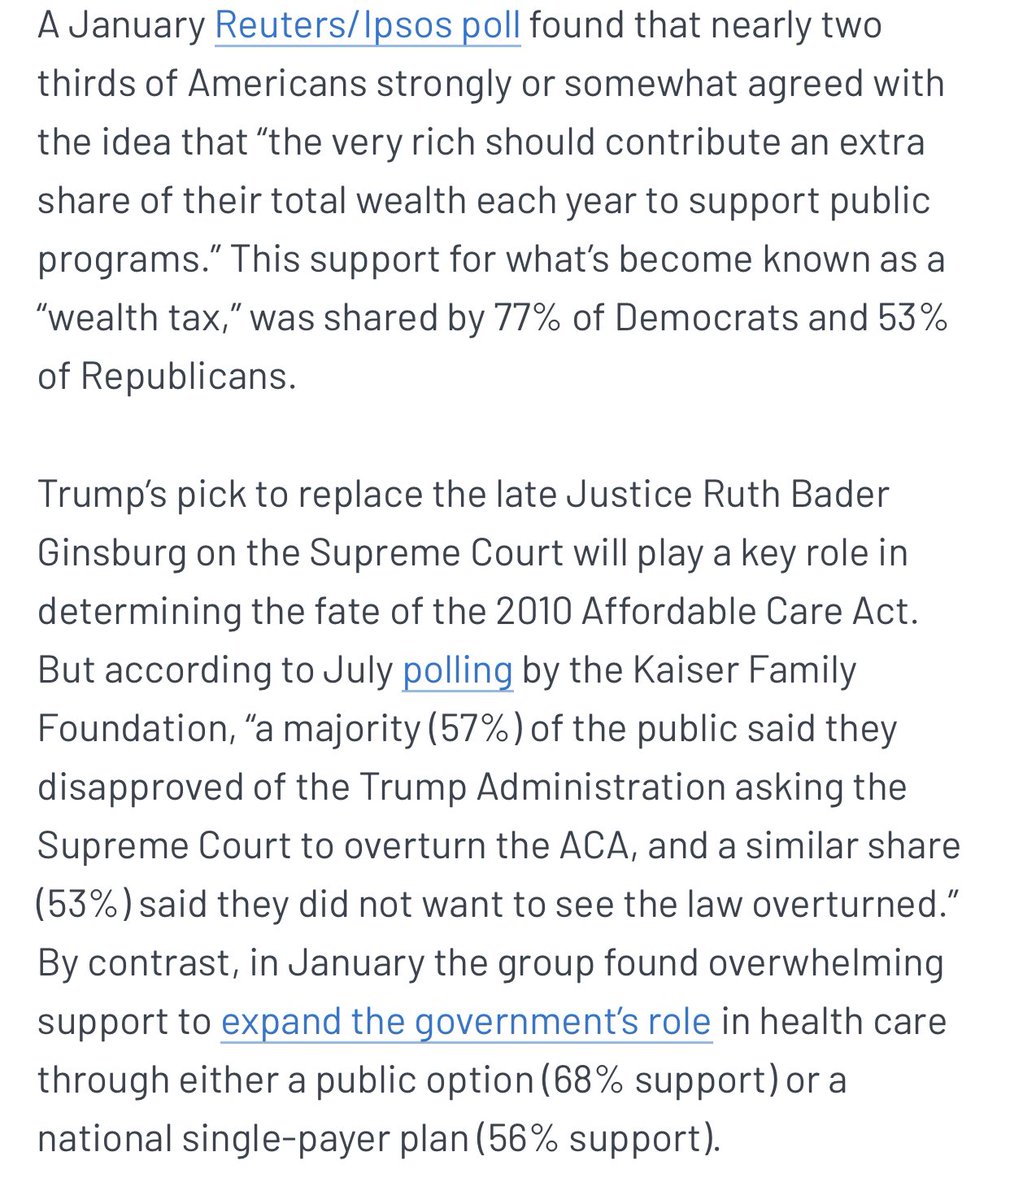 A few months ago, I wrote a piece that just took stock of how a.) Democratic policies tend to be much more popular than Republican ones, and b.) how despite this, Dems are the ones more often referred to in mainstream media as “extreme.”  https://www.mediamatters.org/supreme-court/battle-supreme-court-mainstream-media-call-republican-hypocrisy-savvy-while-treating